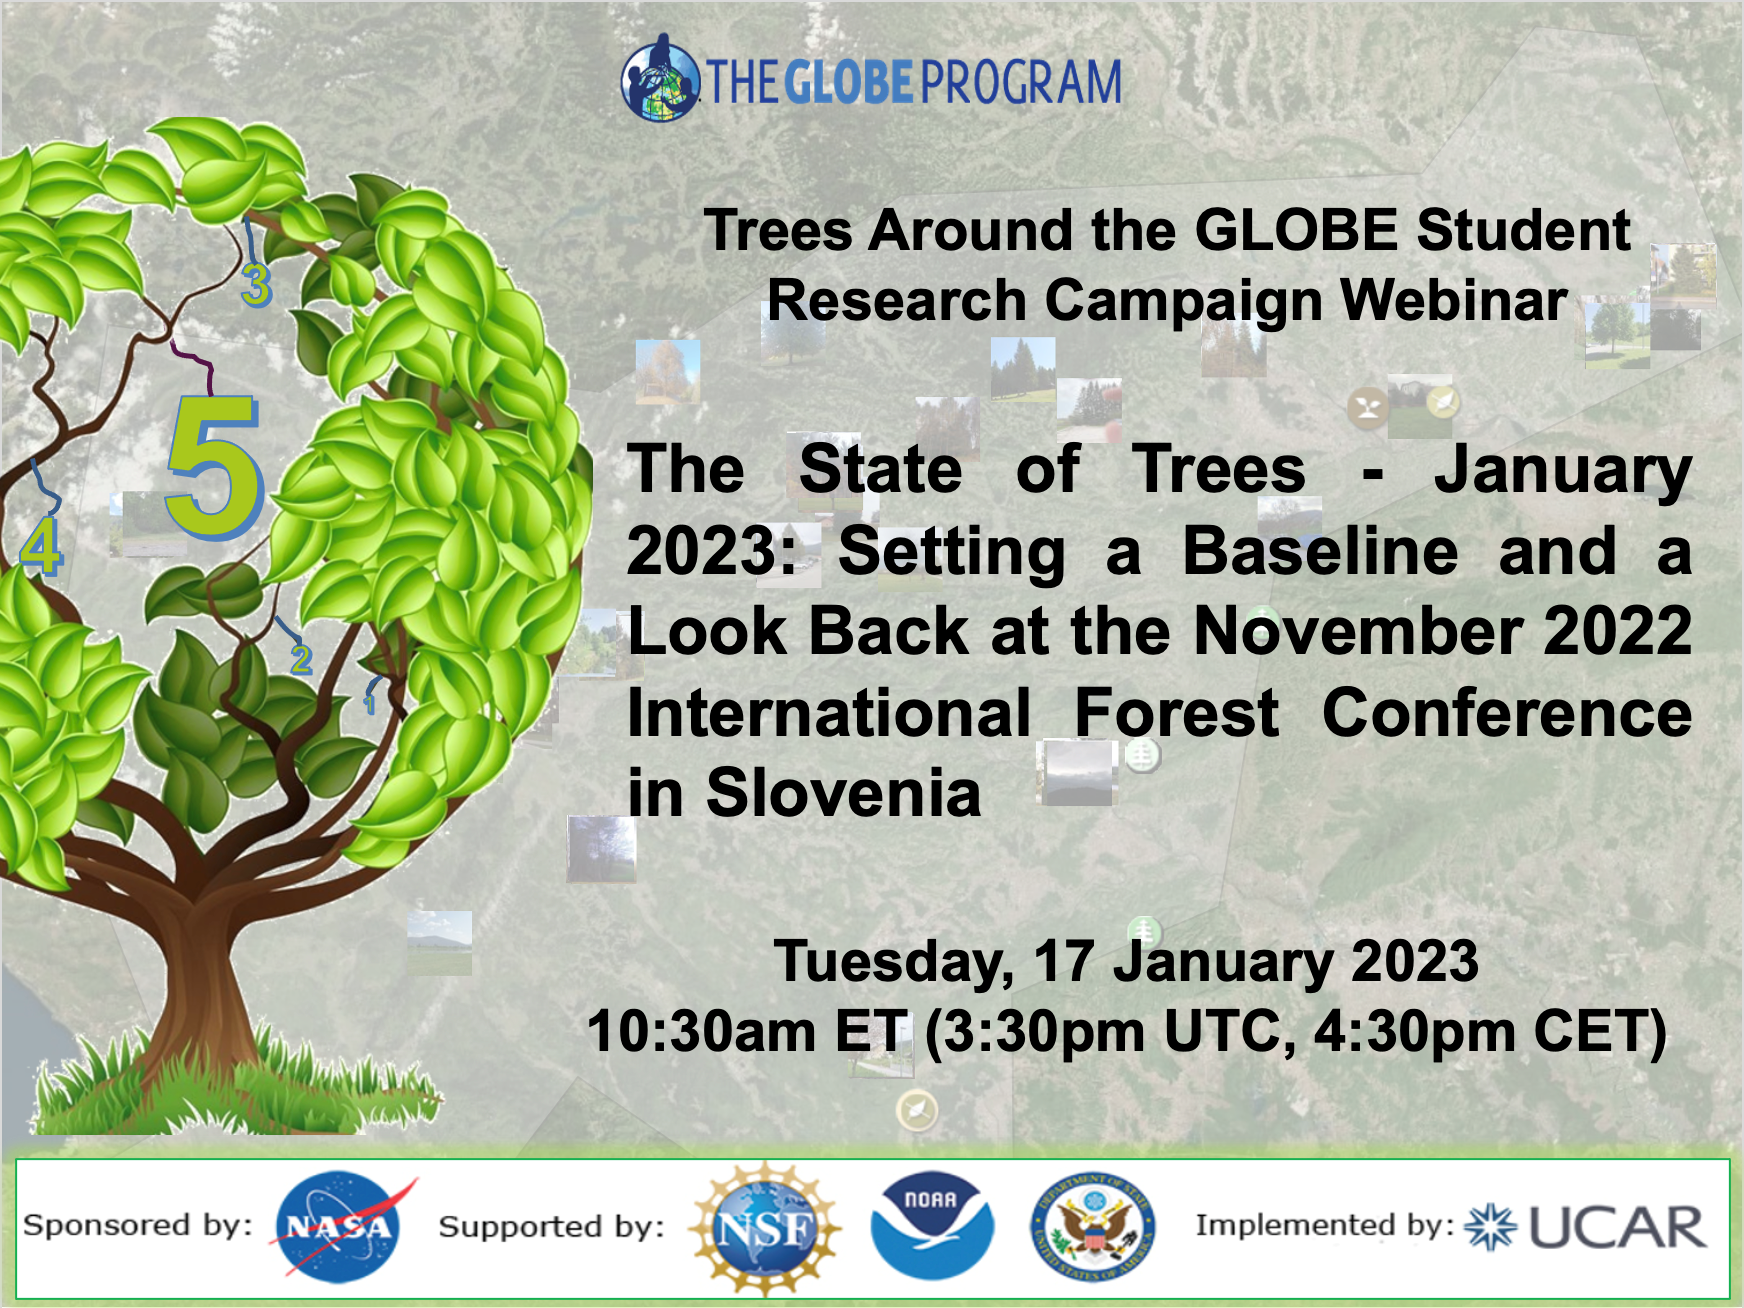 Trees Around the GLOBE 17 January webinar shareable, showing the time, date and title of the event